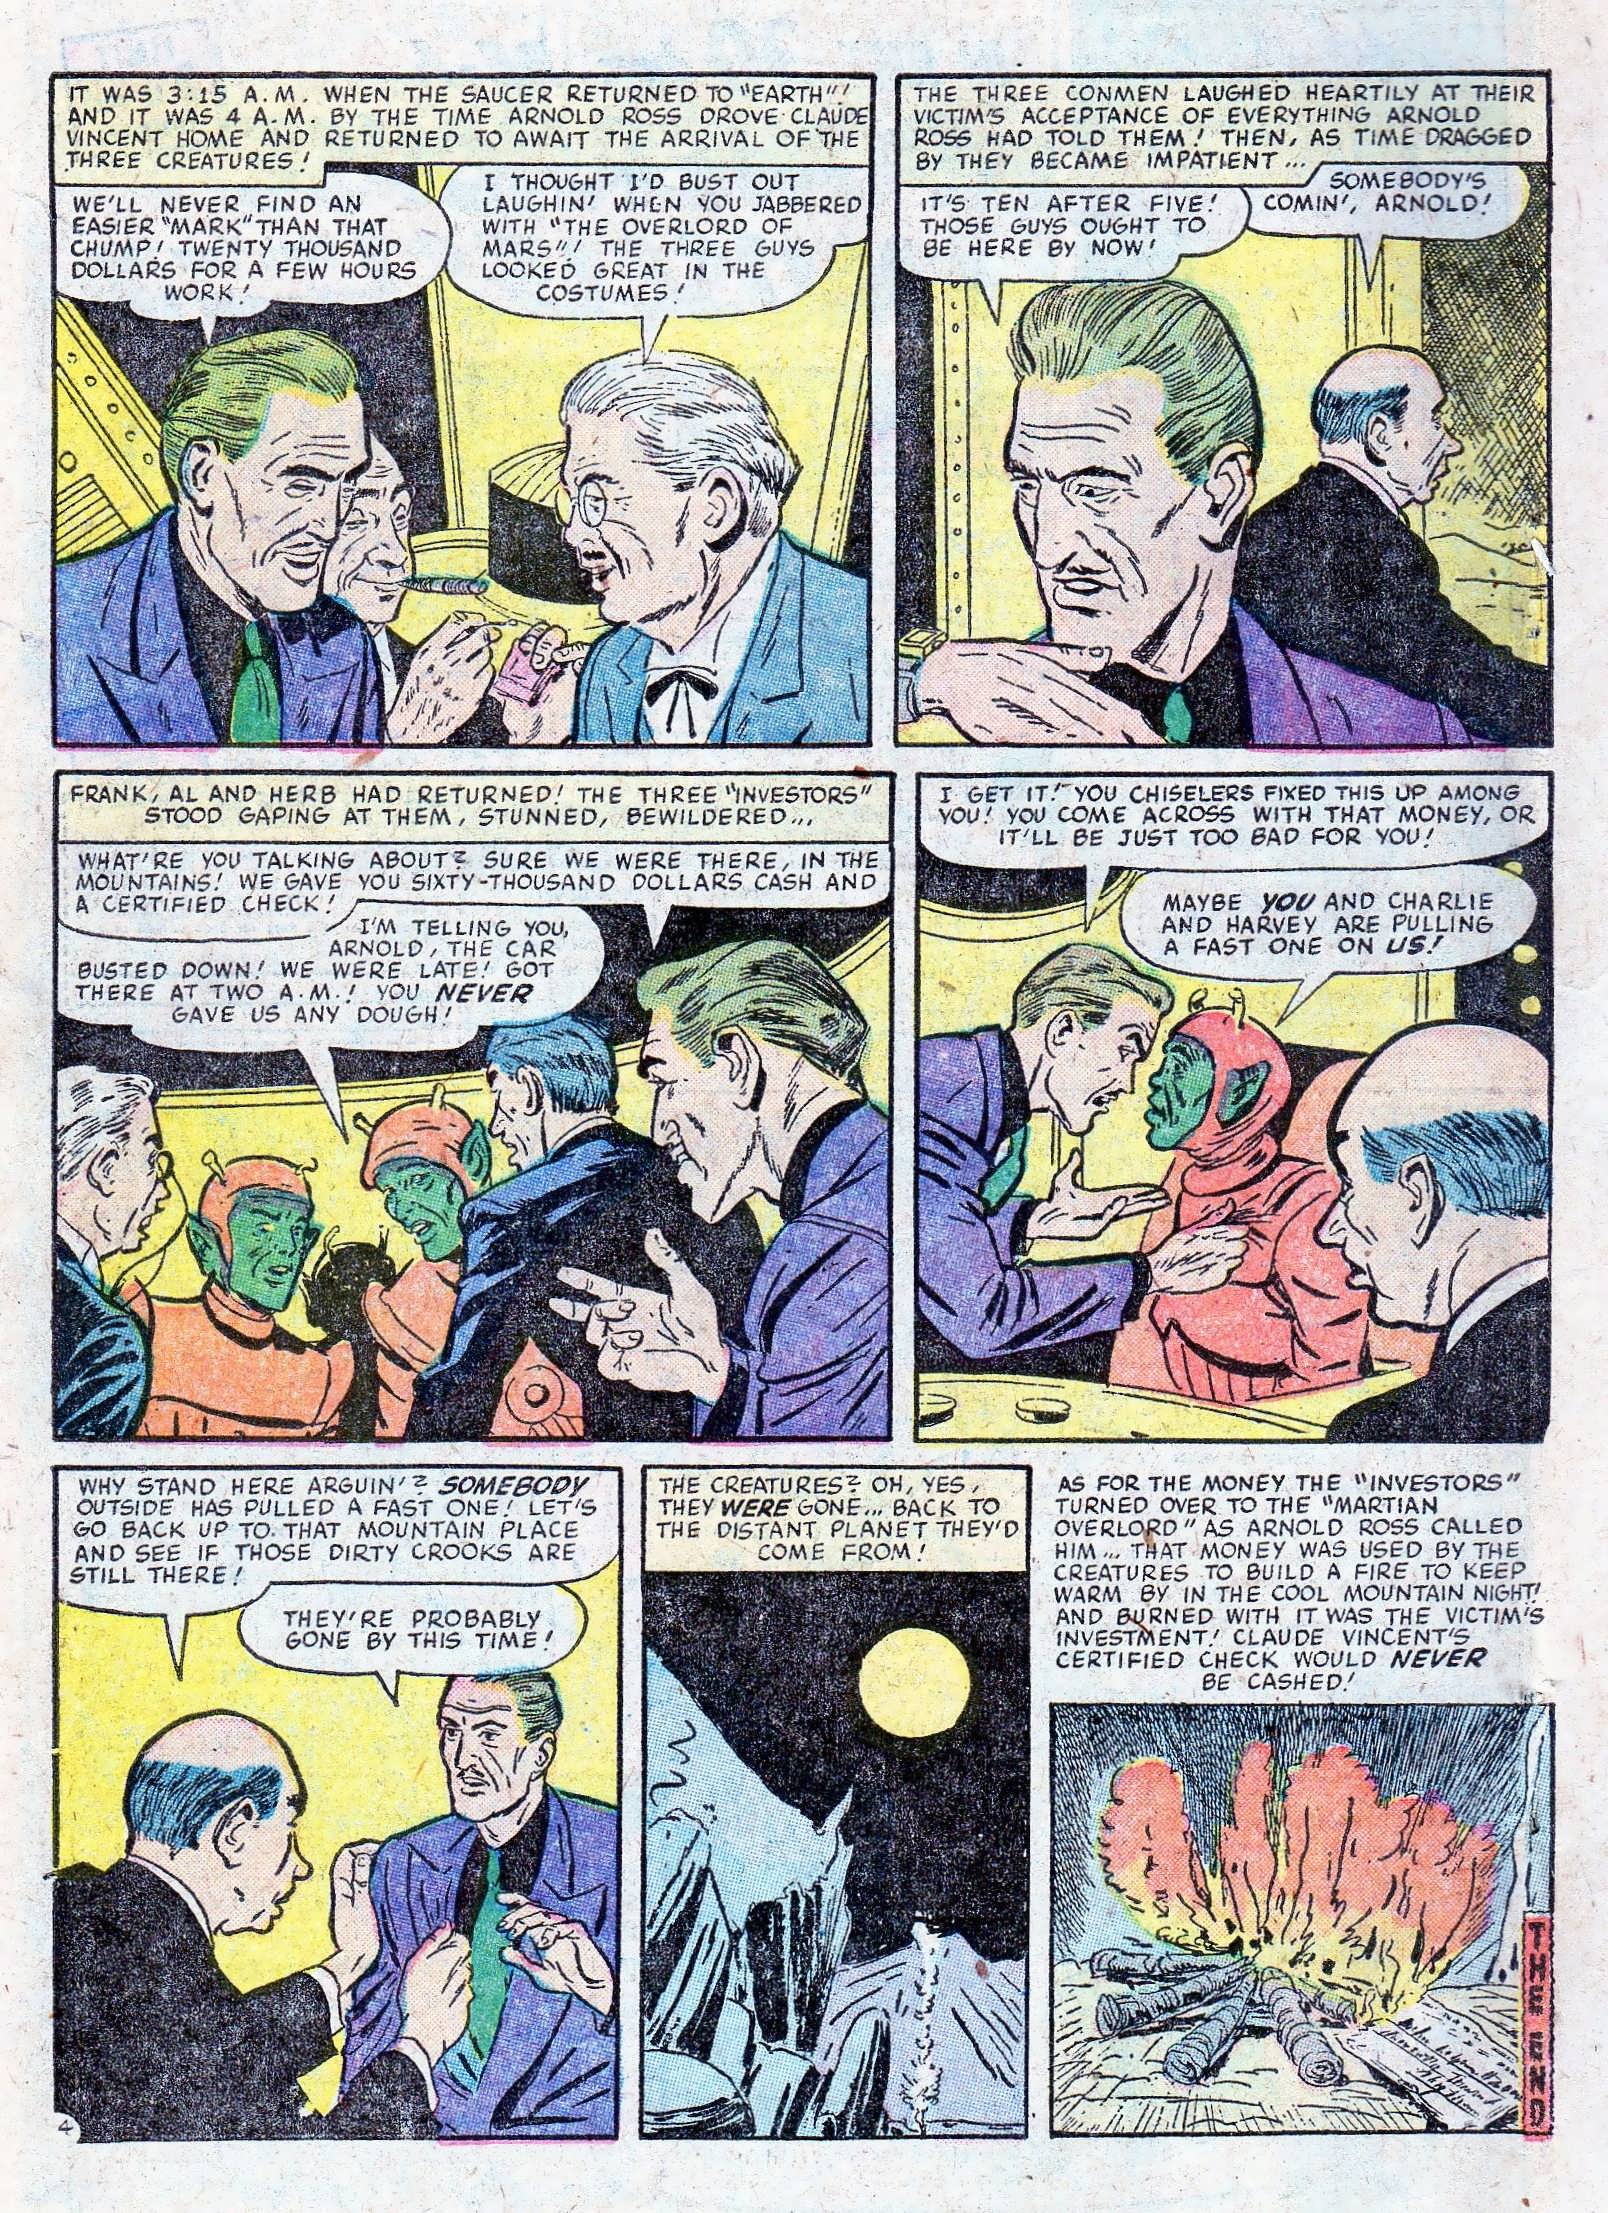 Marvel Tales (1949) 155 Page 25